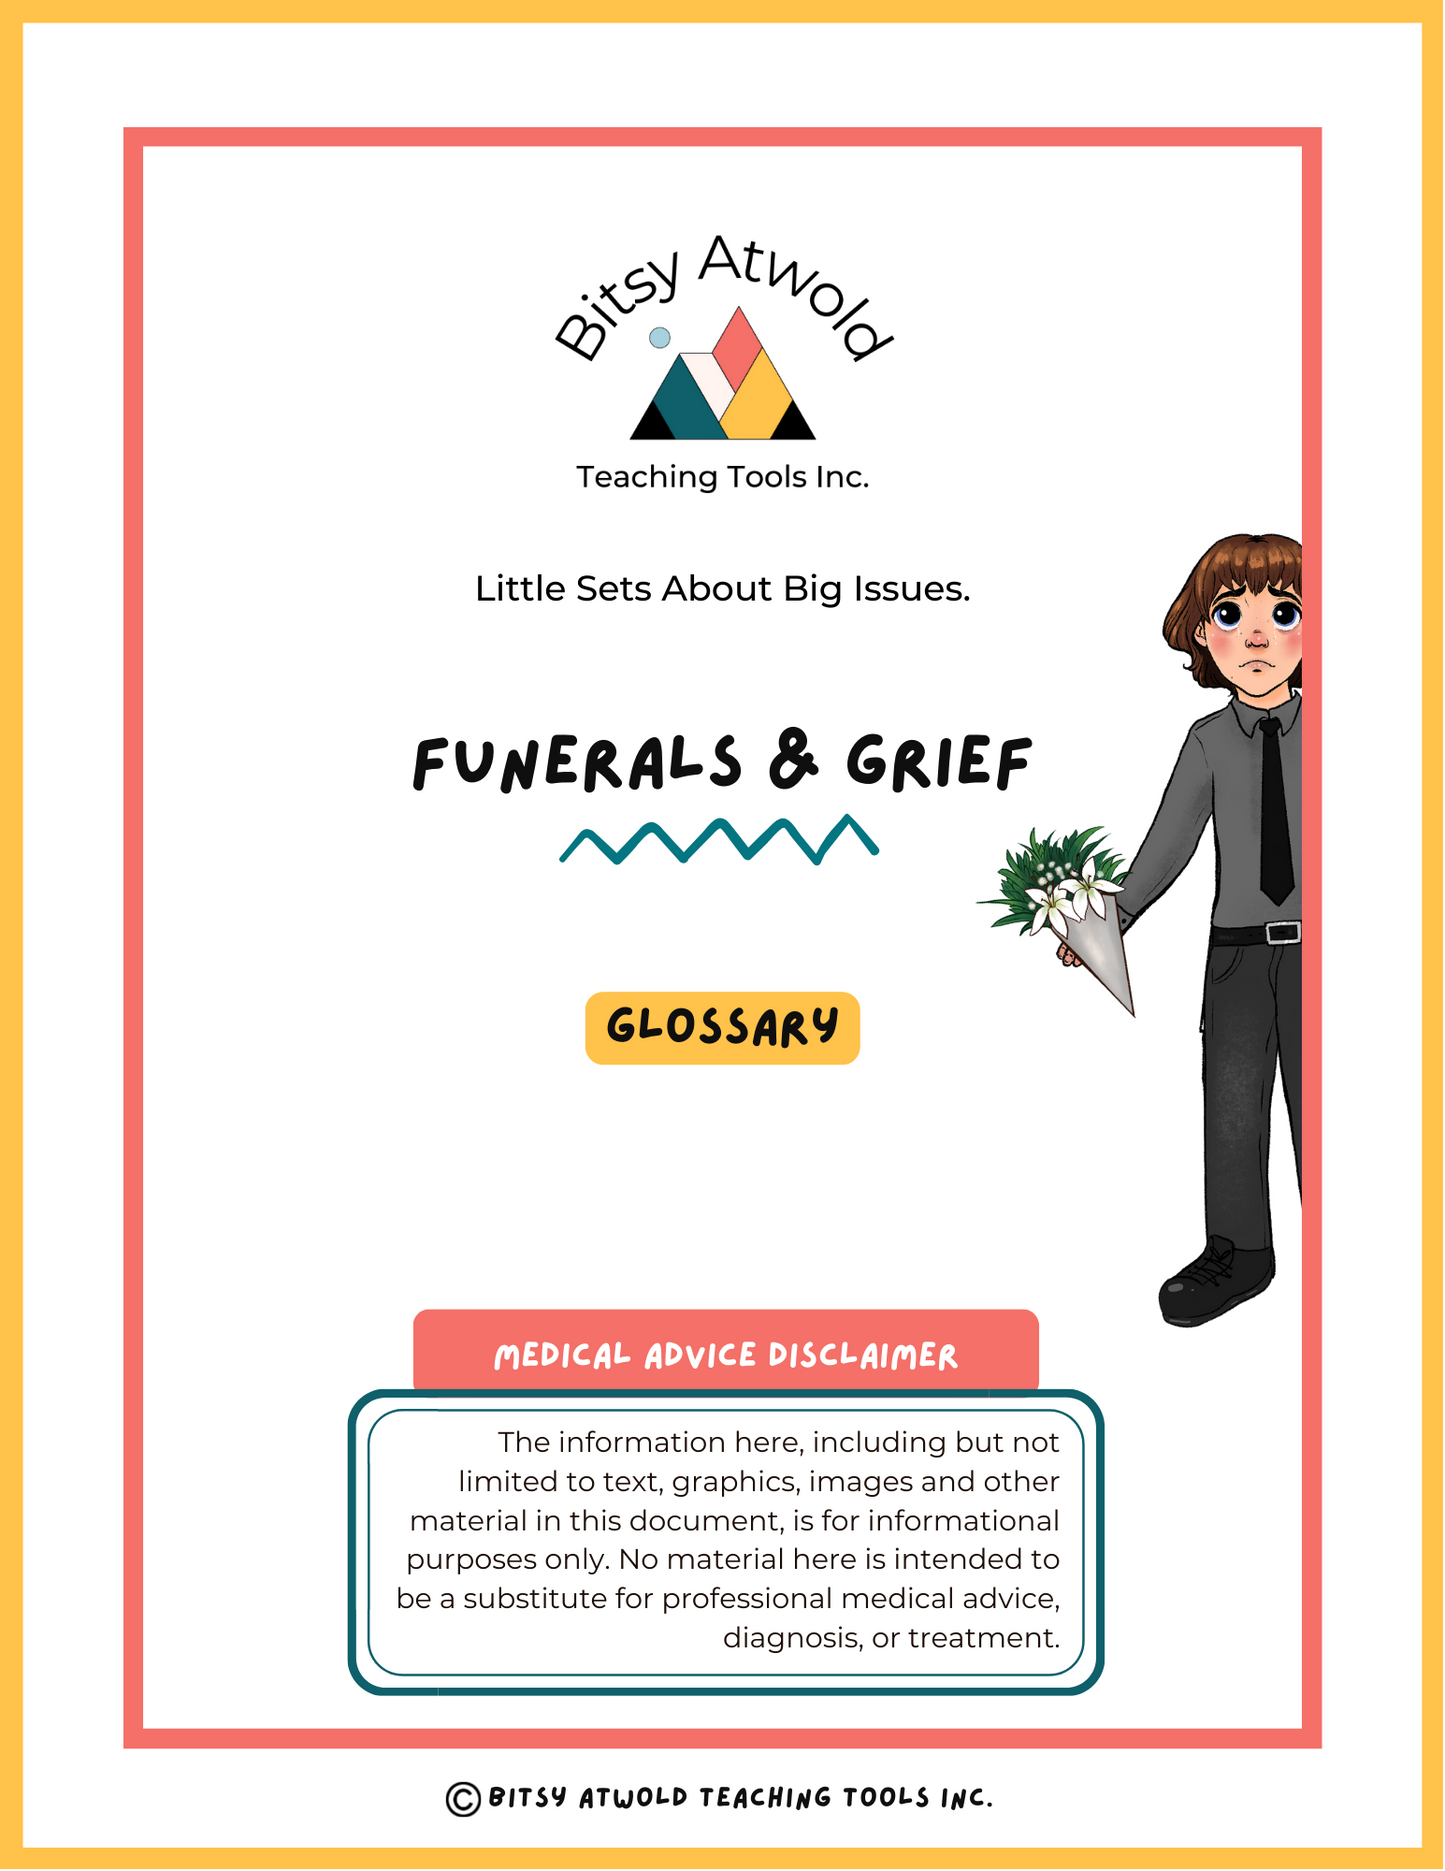 Funerals, Grief - Glossary